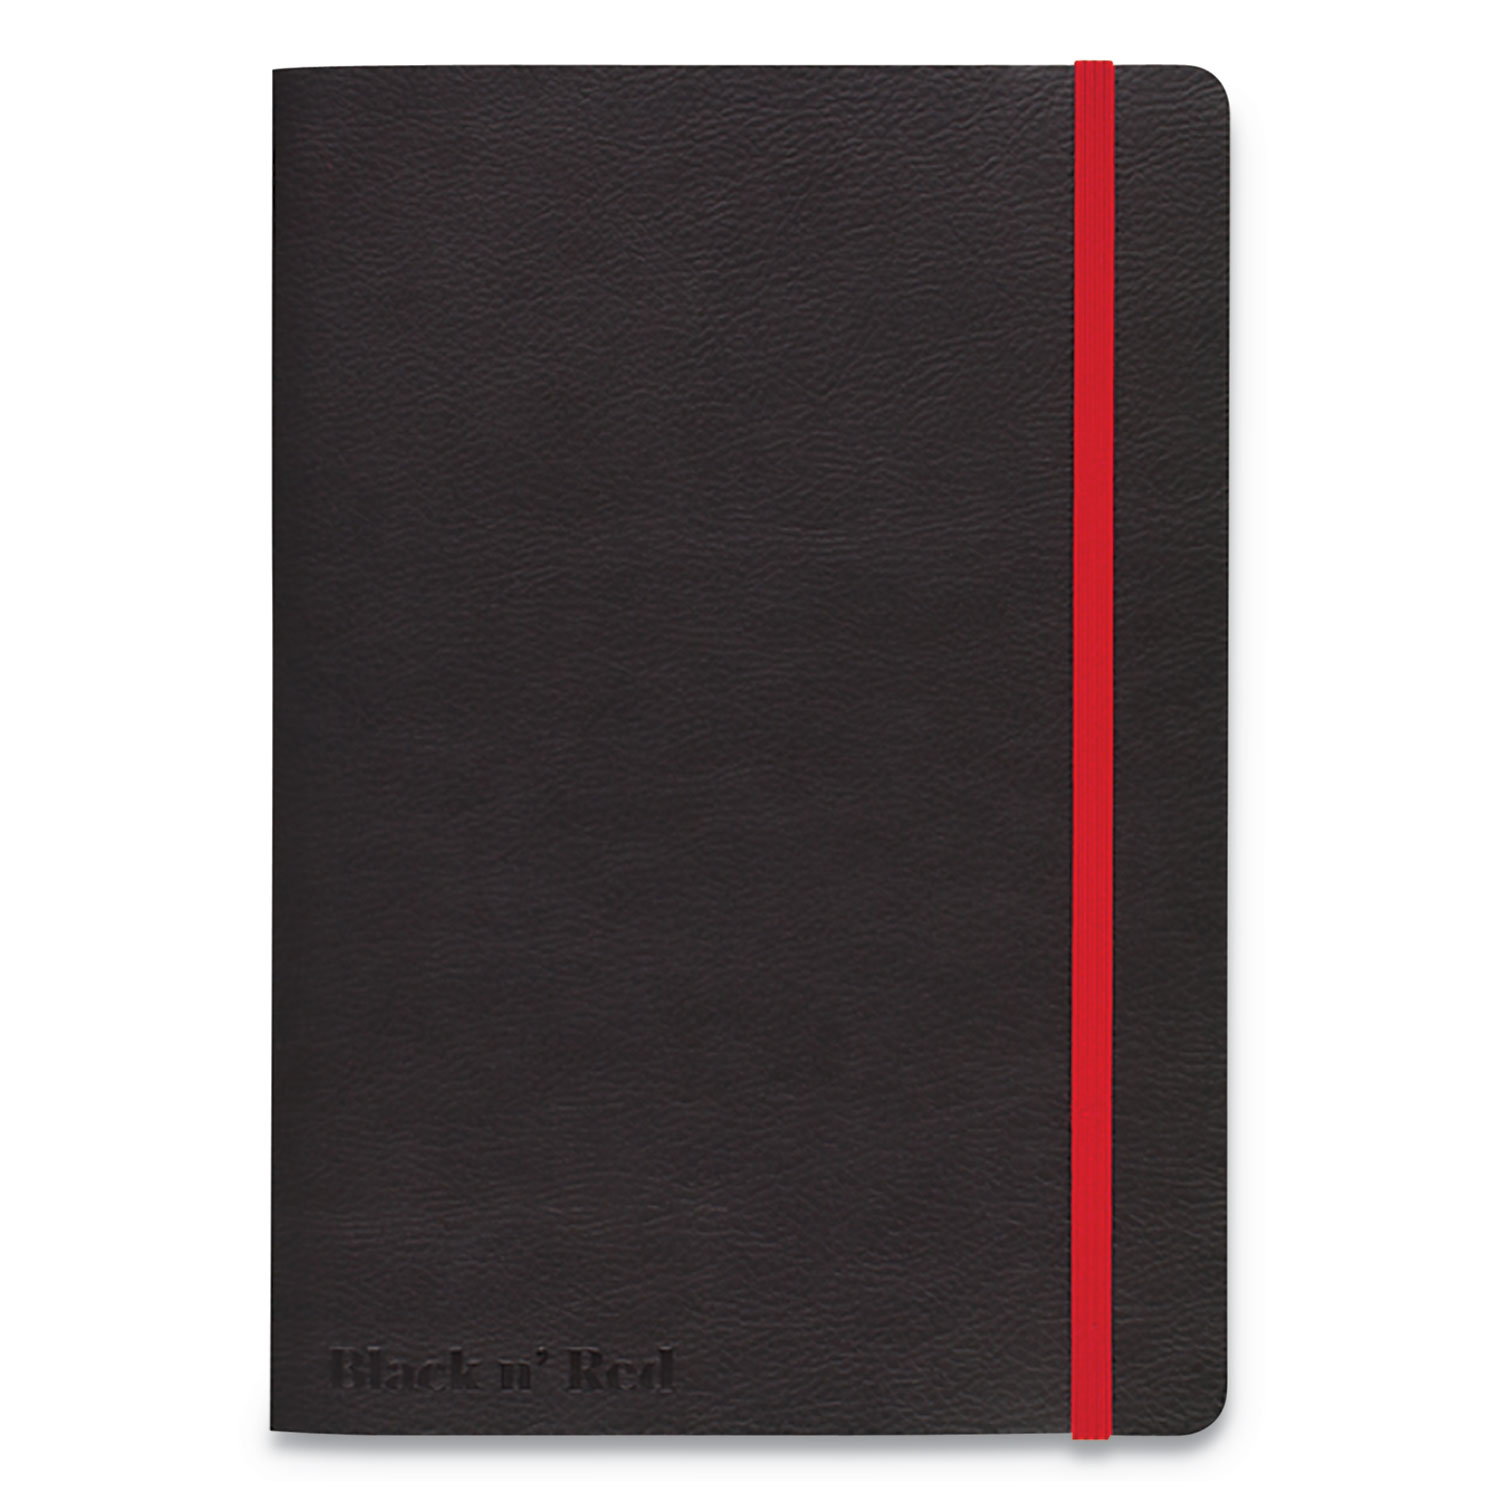  Black n' Red 400110530 Flexible Casebound Notebooks, 1 Subject, Wide/Legal Rule, Black/Red Cover, 8.25 x 5.75, 72 Sheets (JDK400110530) 